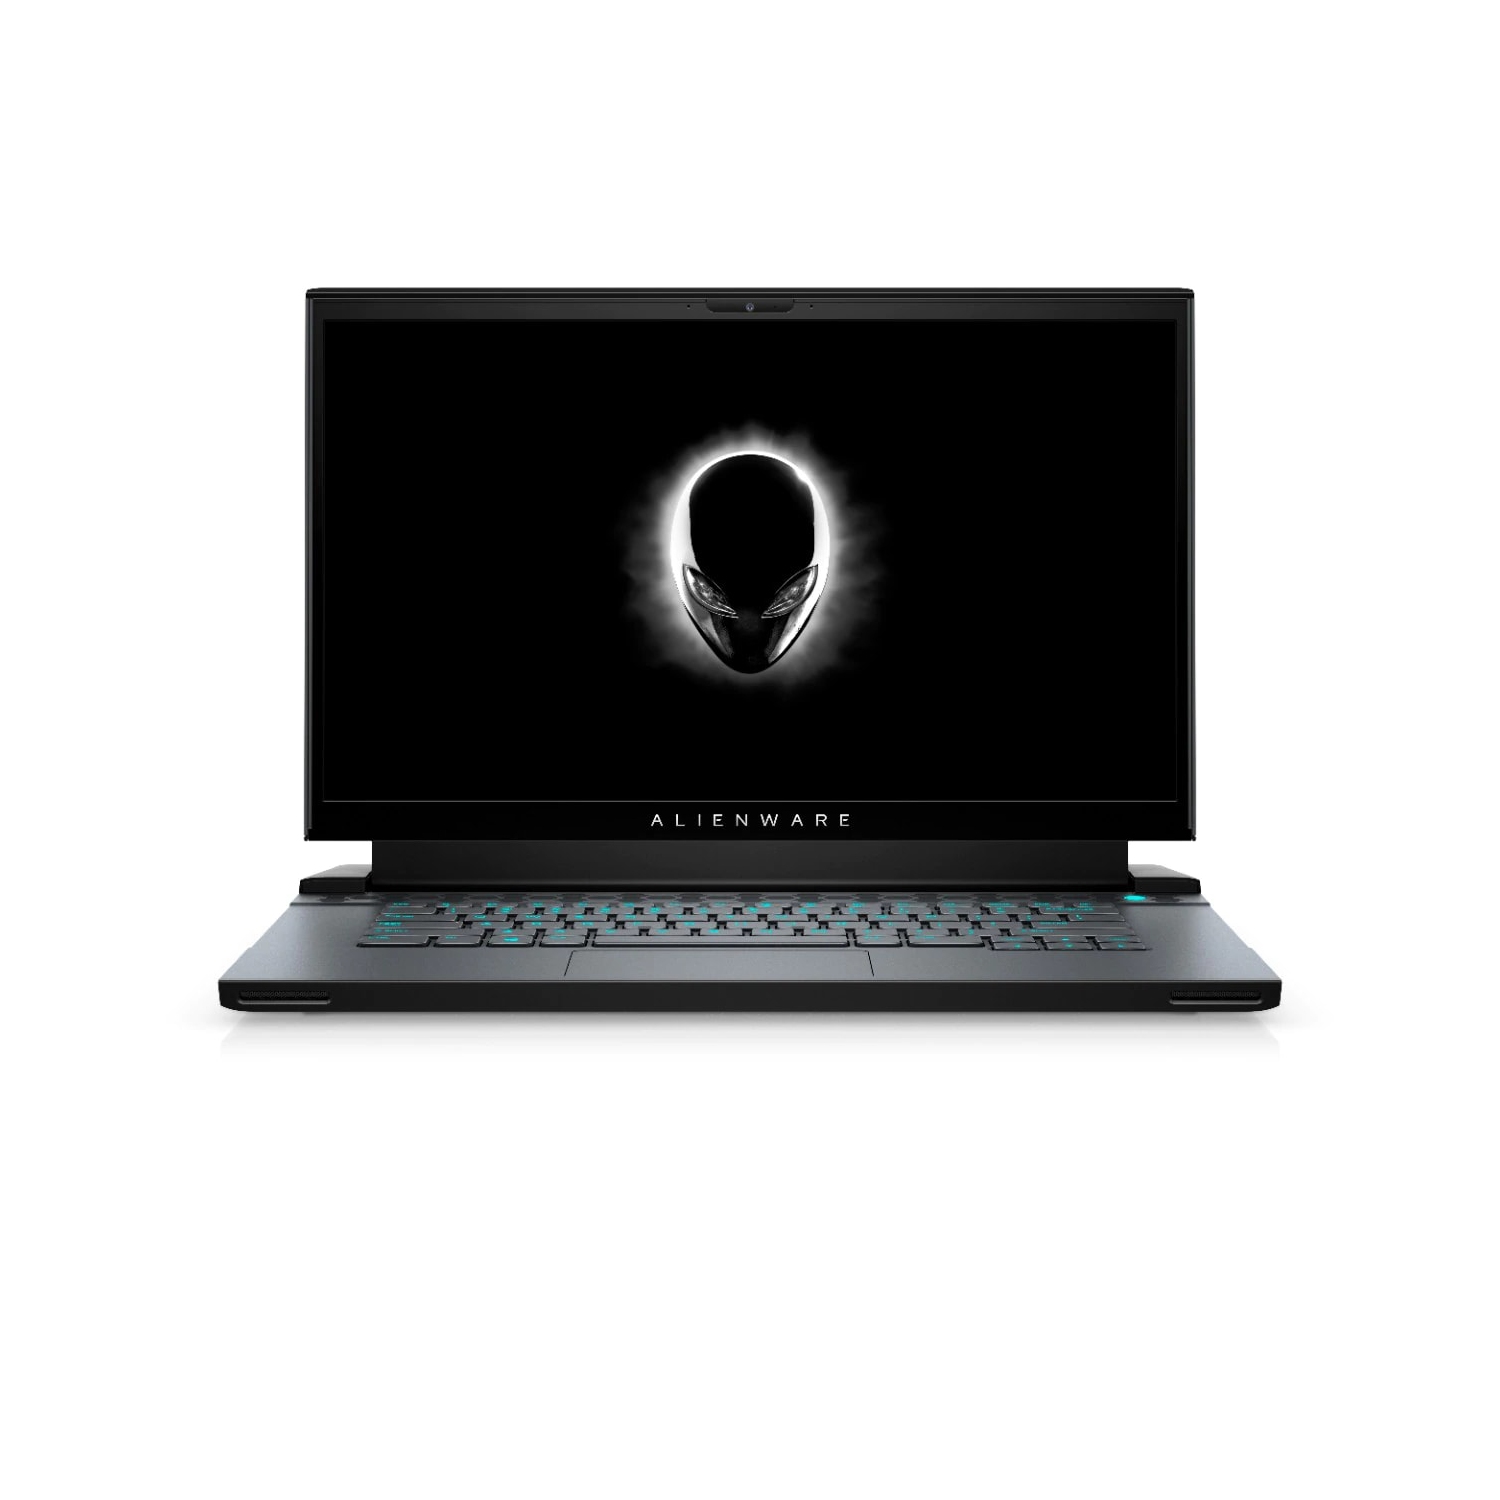 Refurbished (Excellent) - Dell Alienware m15 R4 Gaming Laptop (2021), 15.6" FHD, Core i7, 1TB SSD, 32GB RAM, RTX 3080, 8 Cores @ 5 GHz, 10th Gen CPU Certified Refurbished